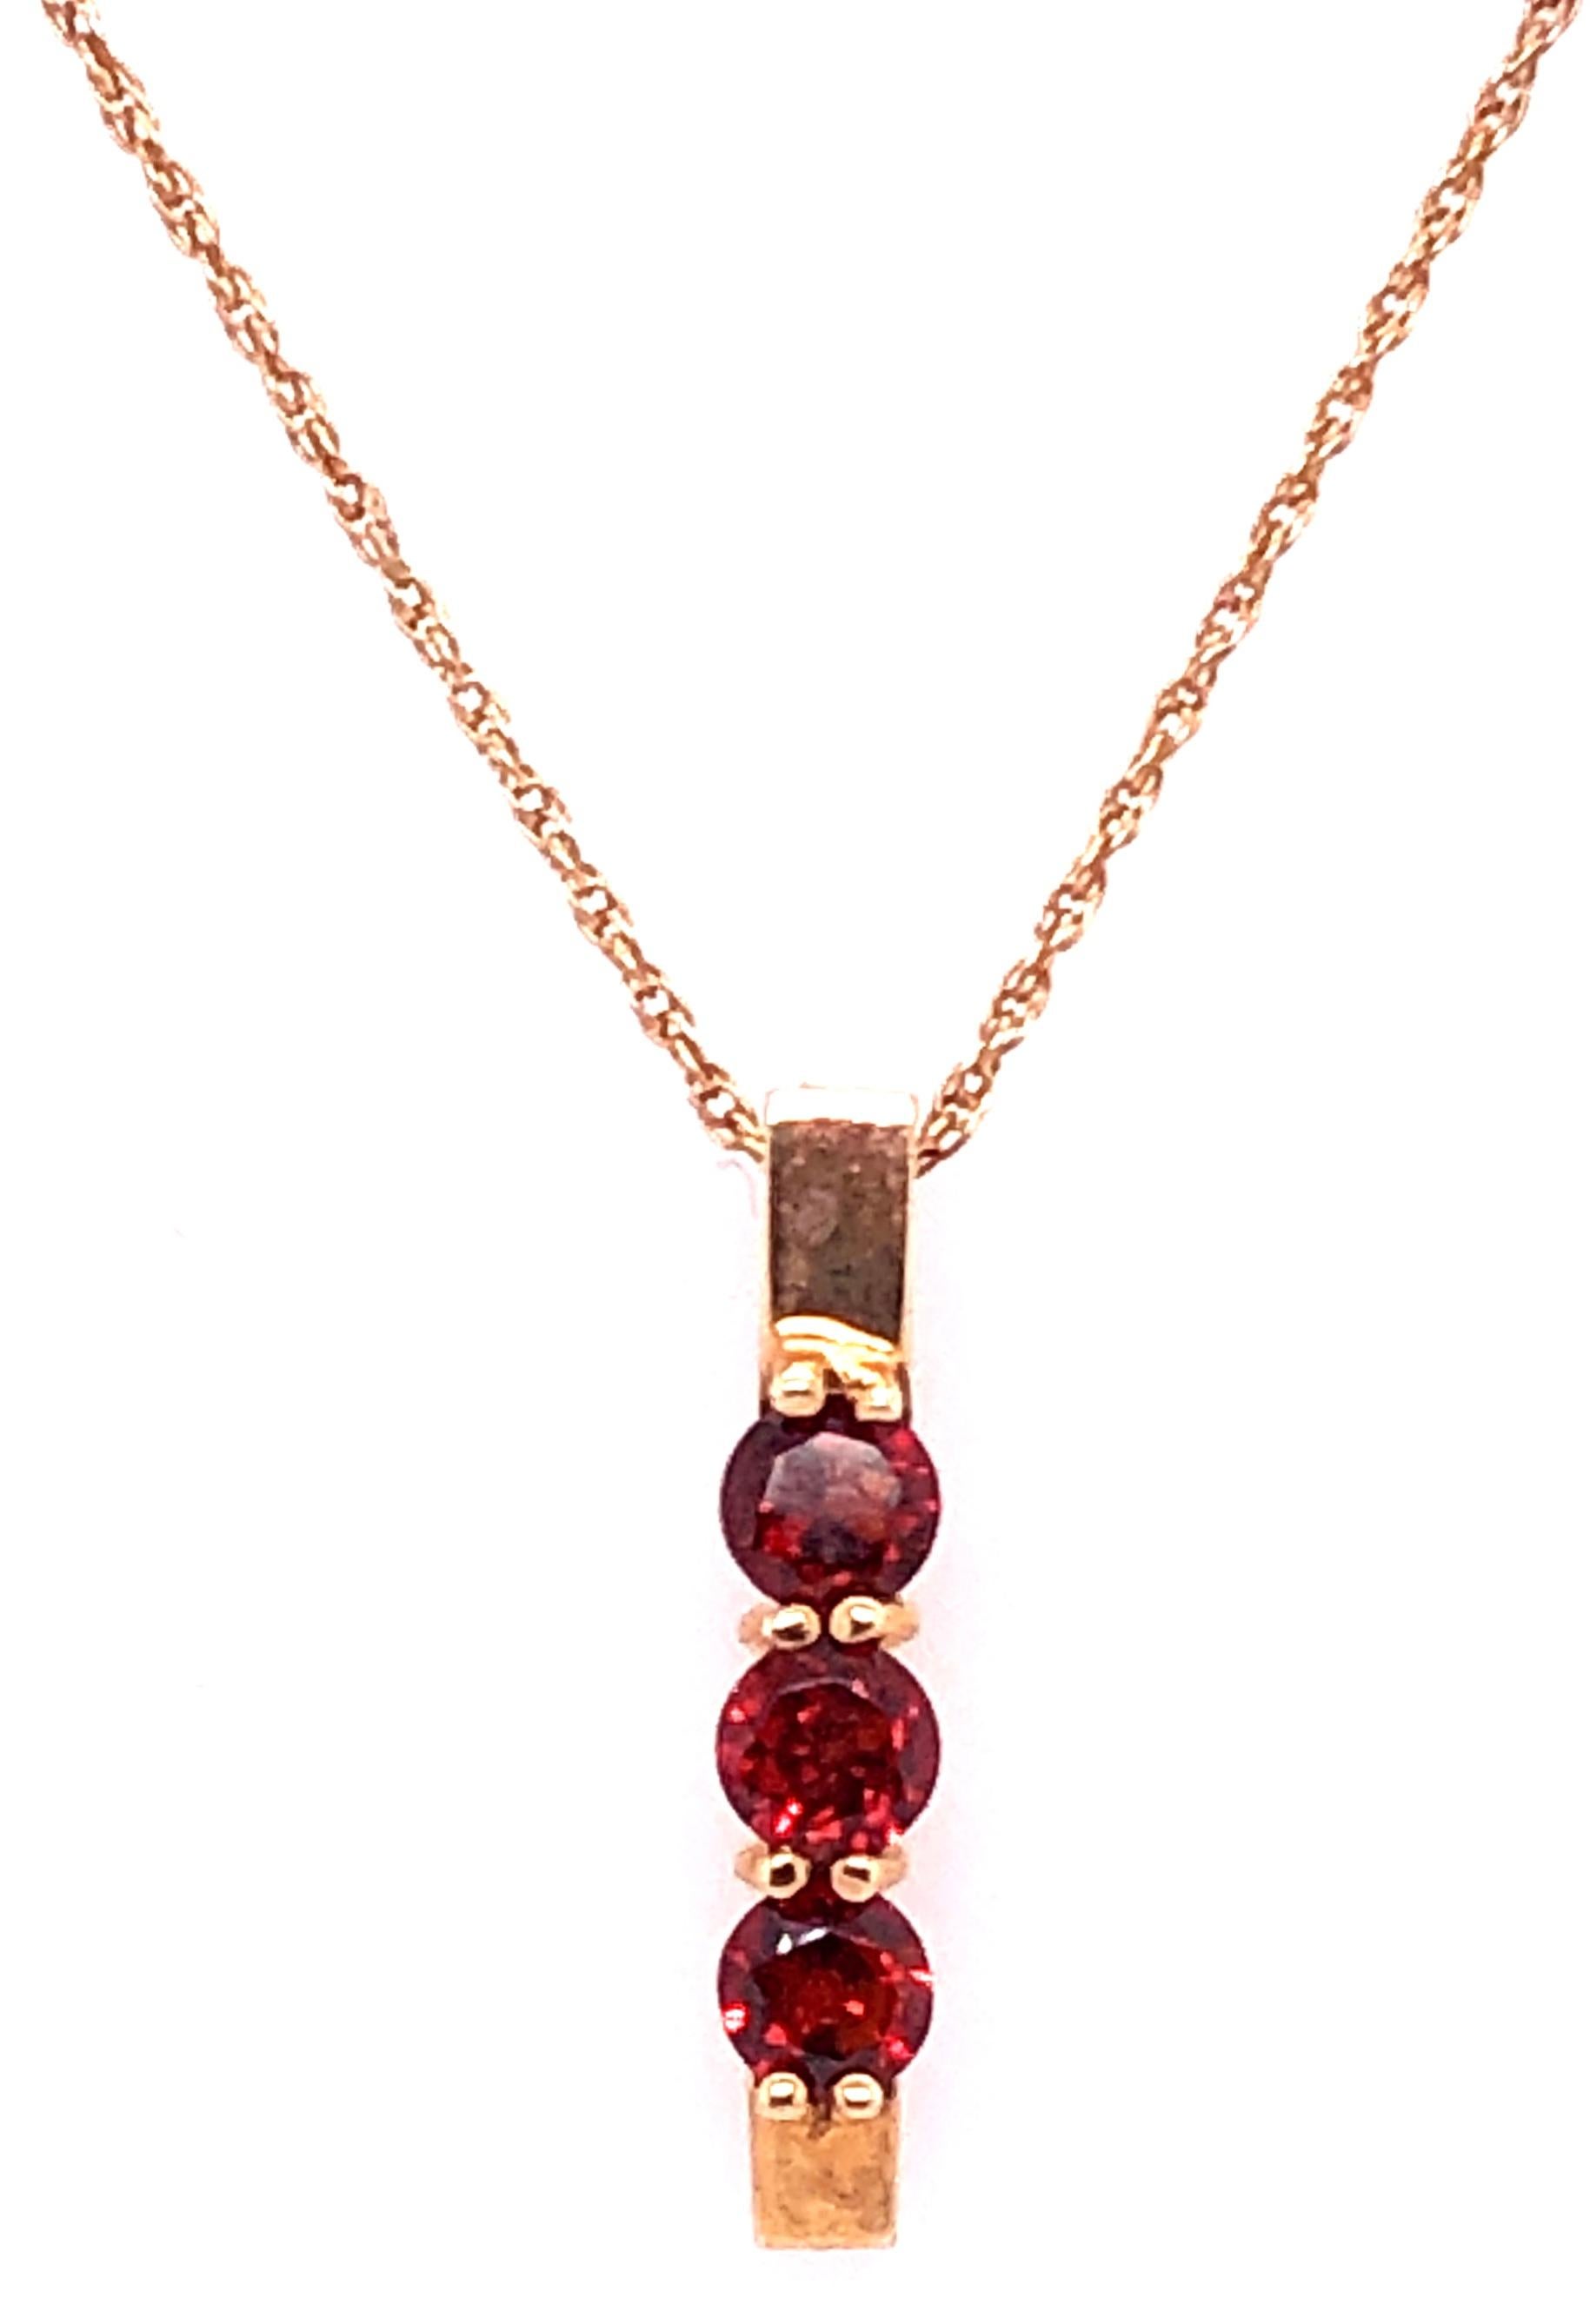 14 Karat Yellow Gold 16 Inch Necklace with Three Round Garnet Pendant.
1.17 grams weight of pendant. Garnets approx .25 Carats each. 
2.5 grams total weight
Stamped NY Co 14K